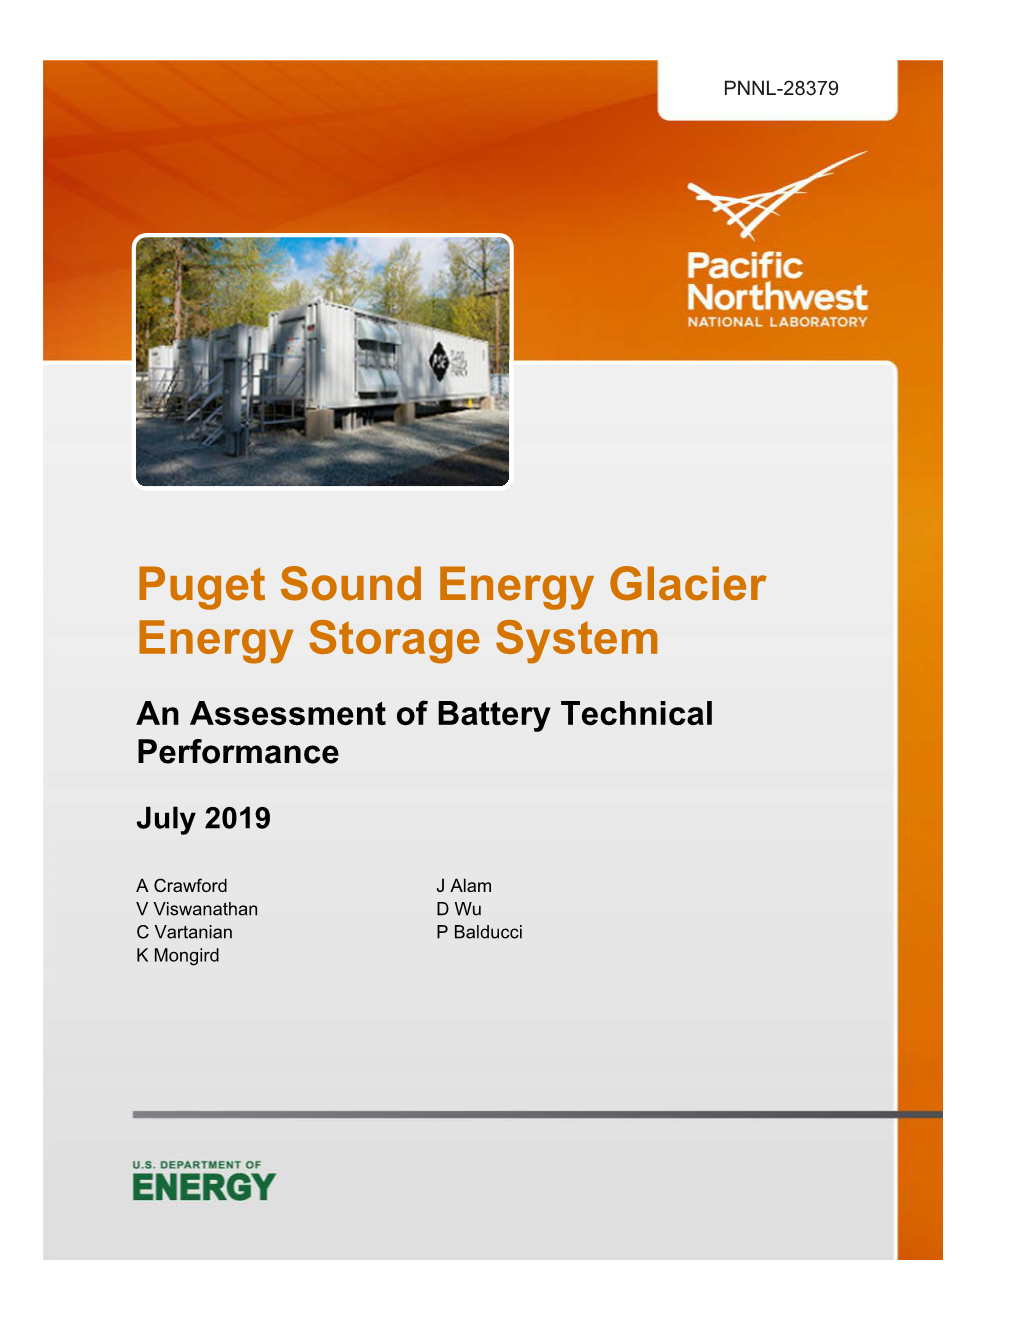 Puget Sound Energy Glacier Energy Storage System an Assessment of Battery Technical Performance